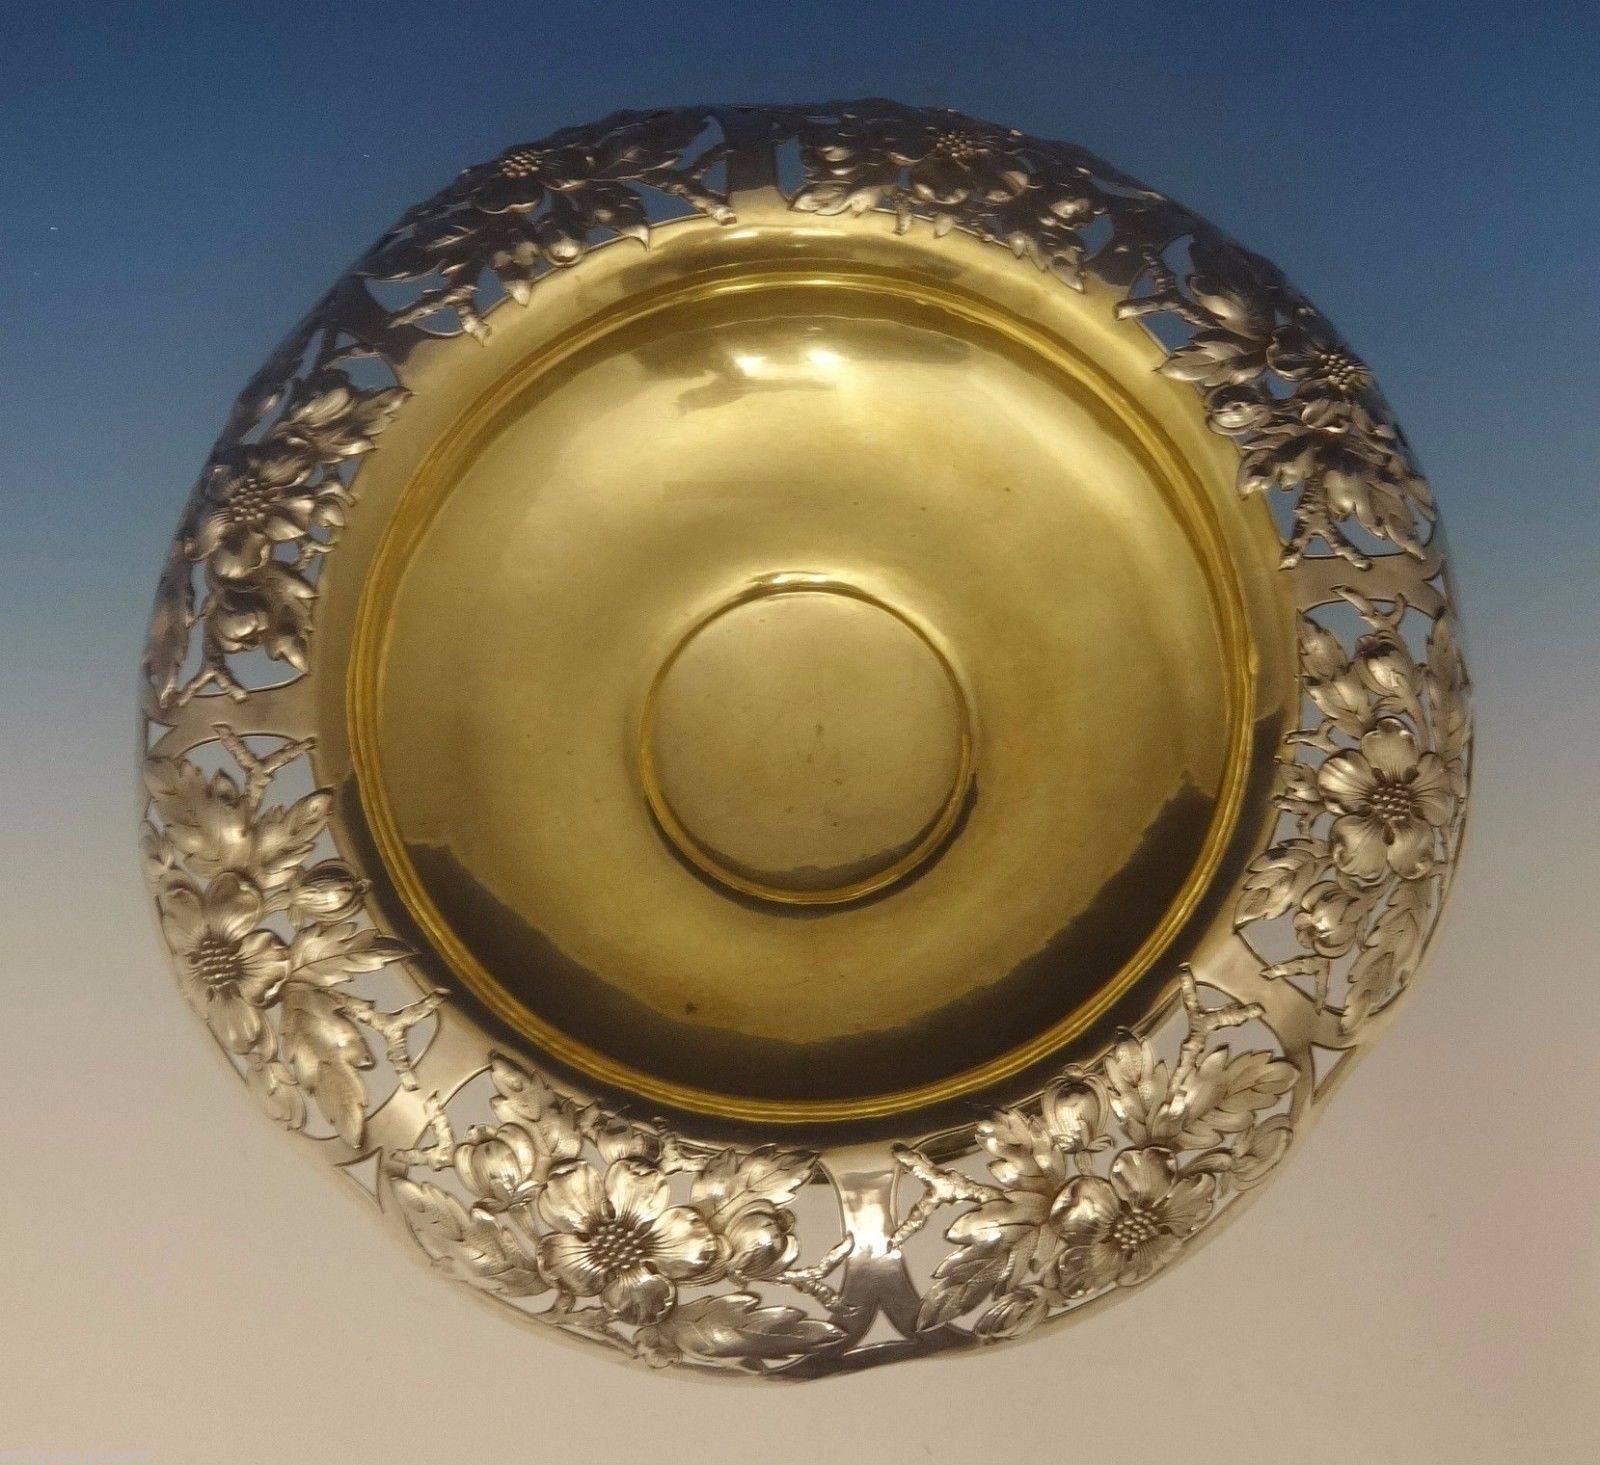 Gorham.

This marvelous sterling silver centerpiece bowl was made by Gorham. It features a wide floral pierced border and a gold washed interior. The base is also pierced and chased with flowers. The piece is marked with #8041 and it dates from